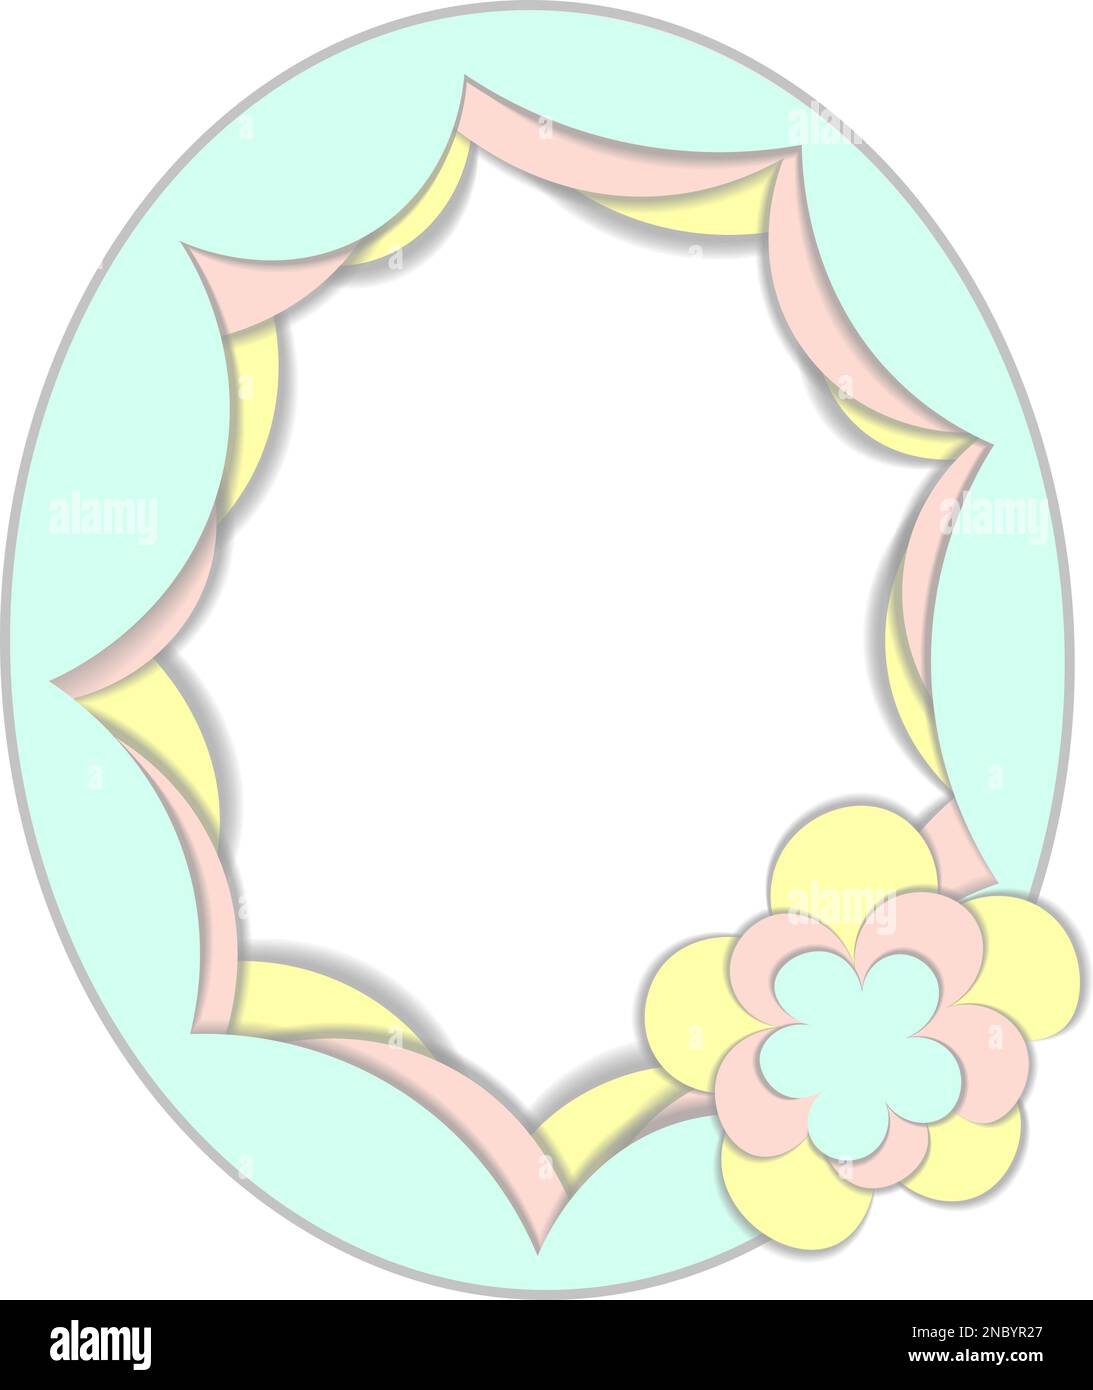 Oval shaped border drawing in flat paper cut style decorated with flower Stock Vector